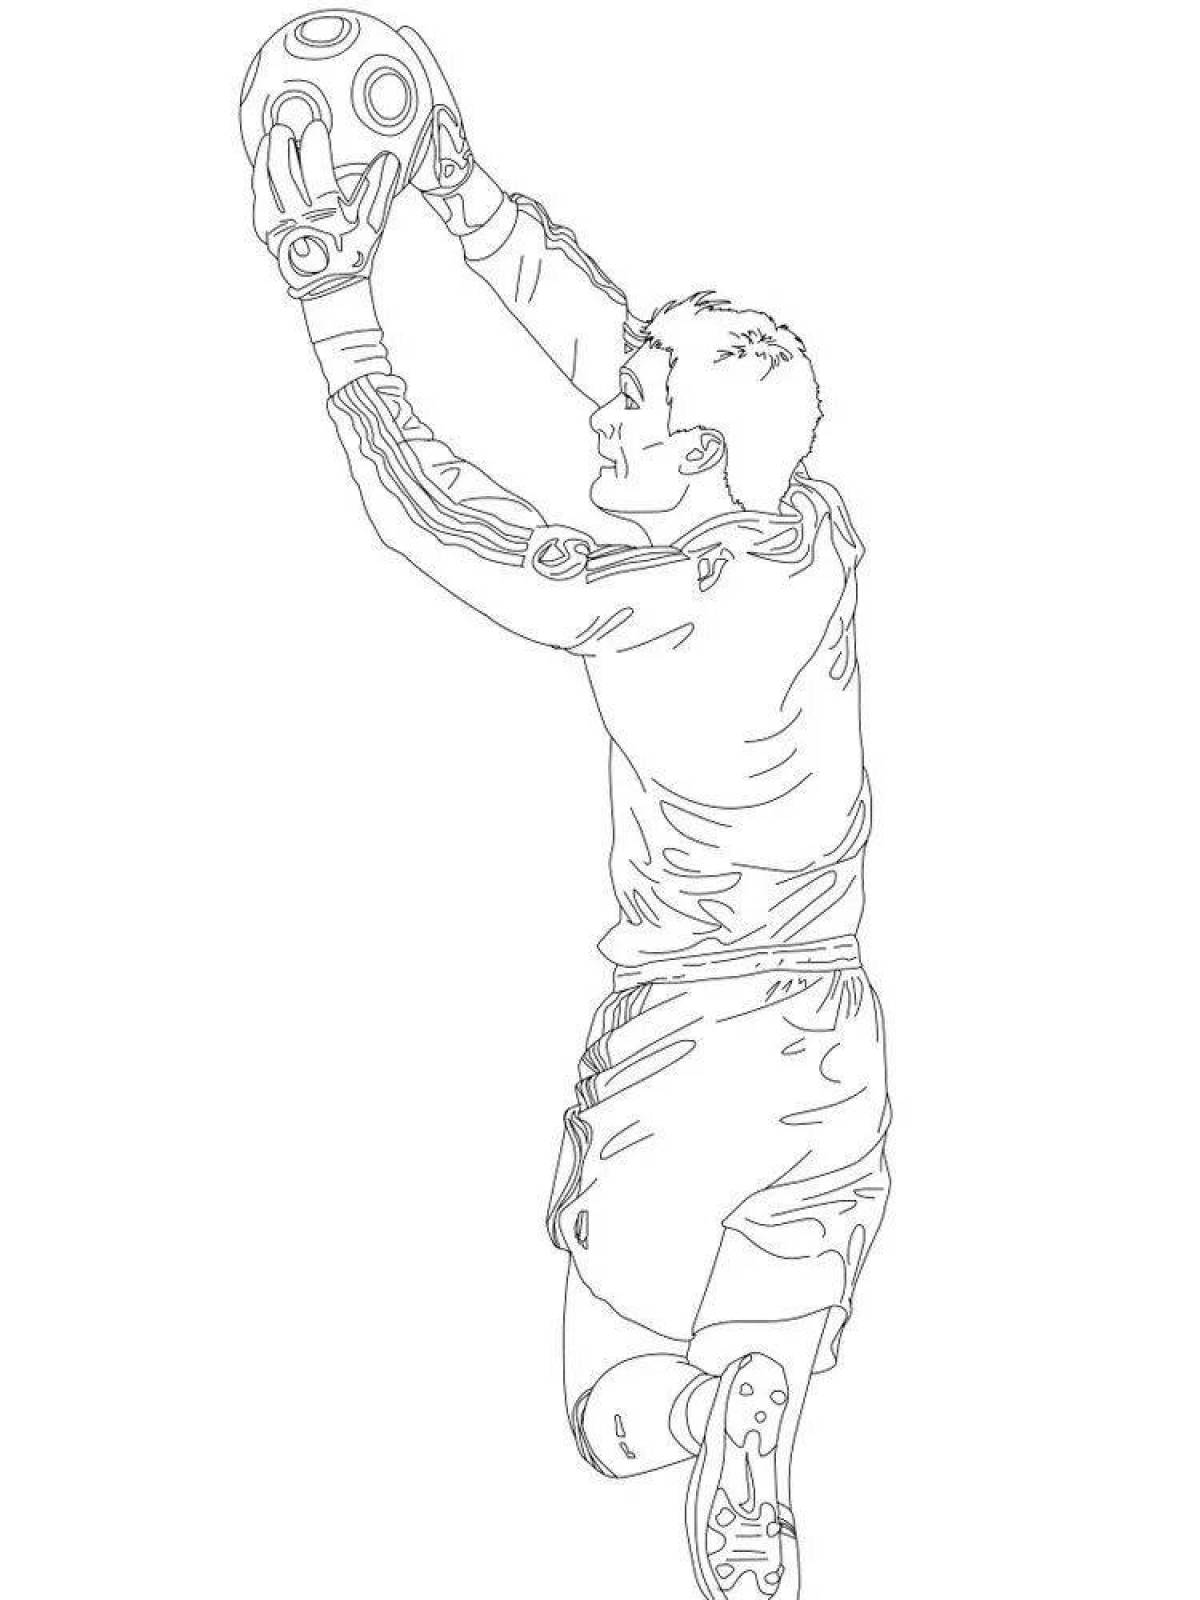 Coloring page nice football goalkeeper